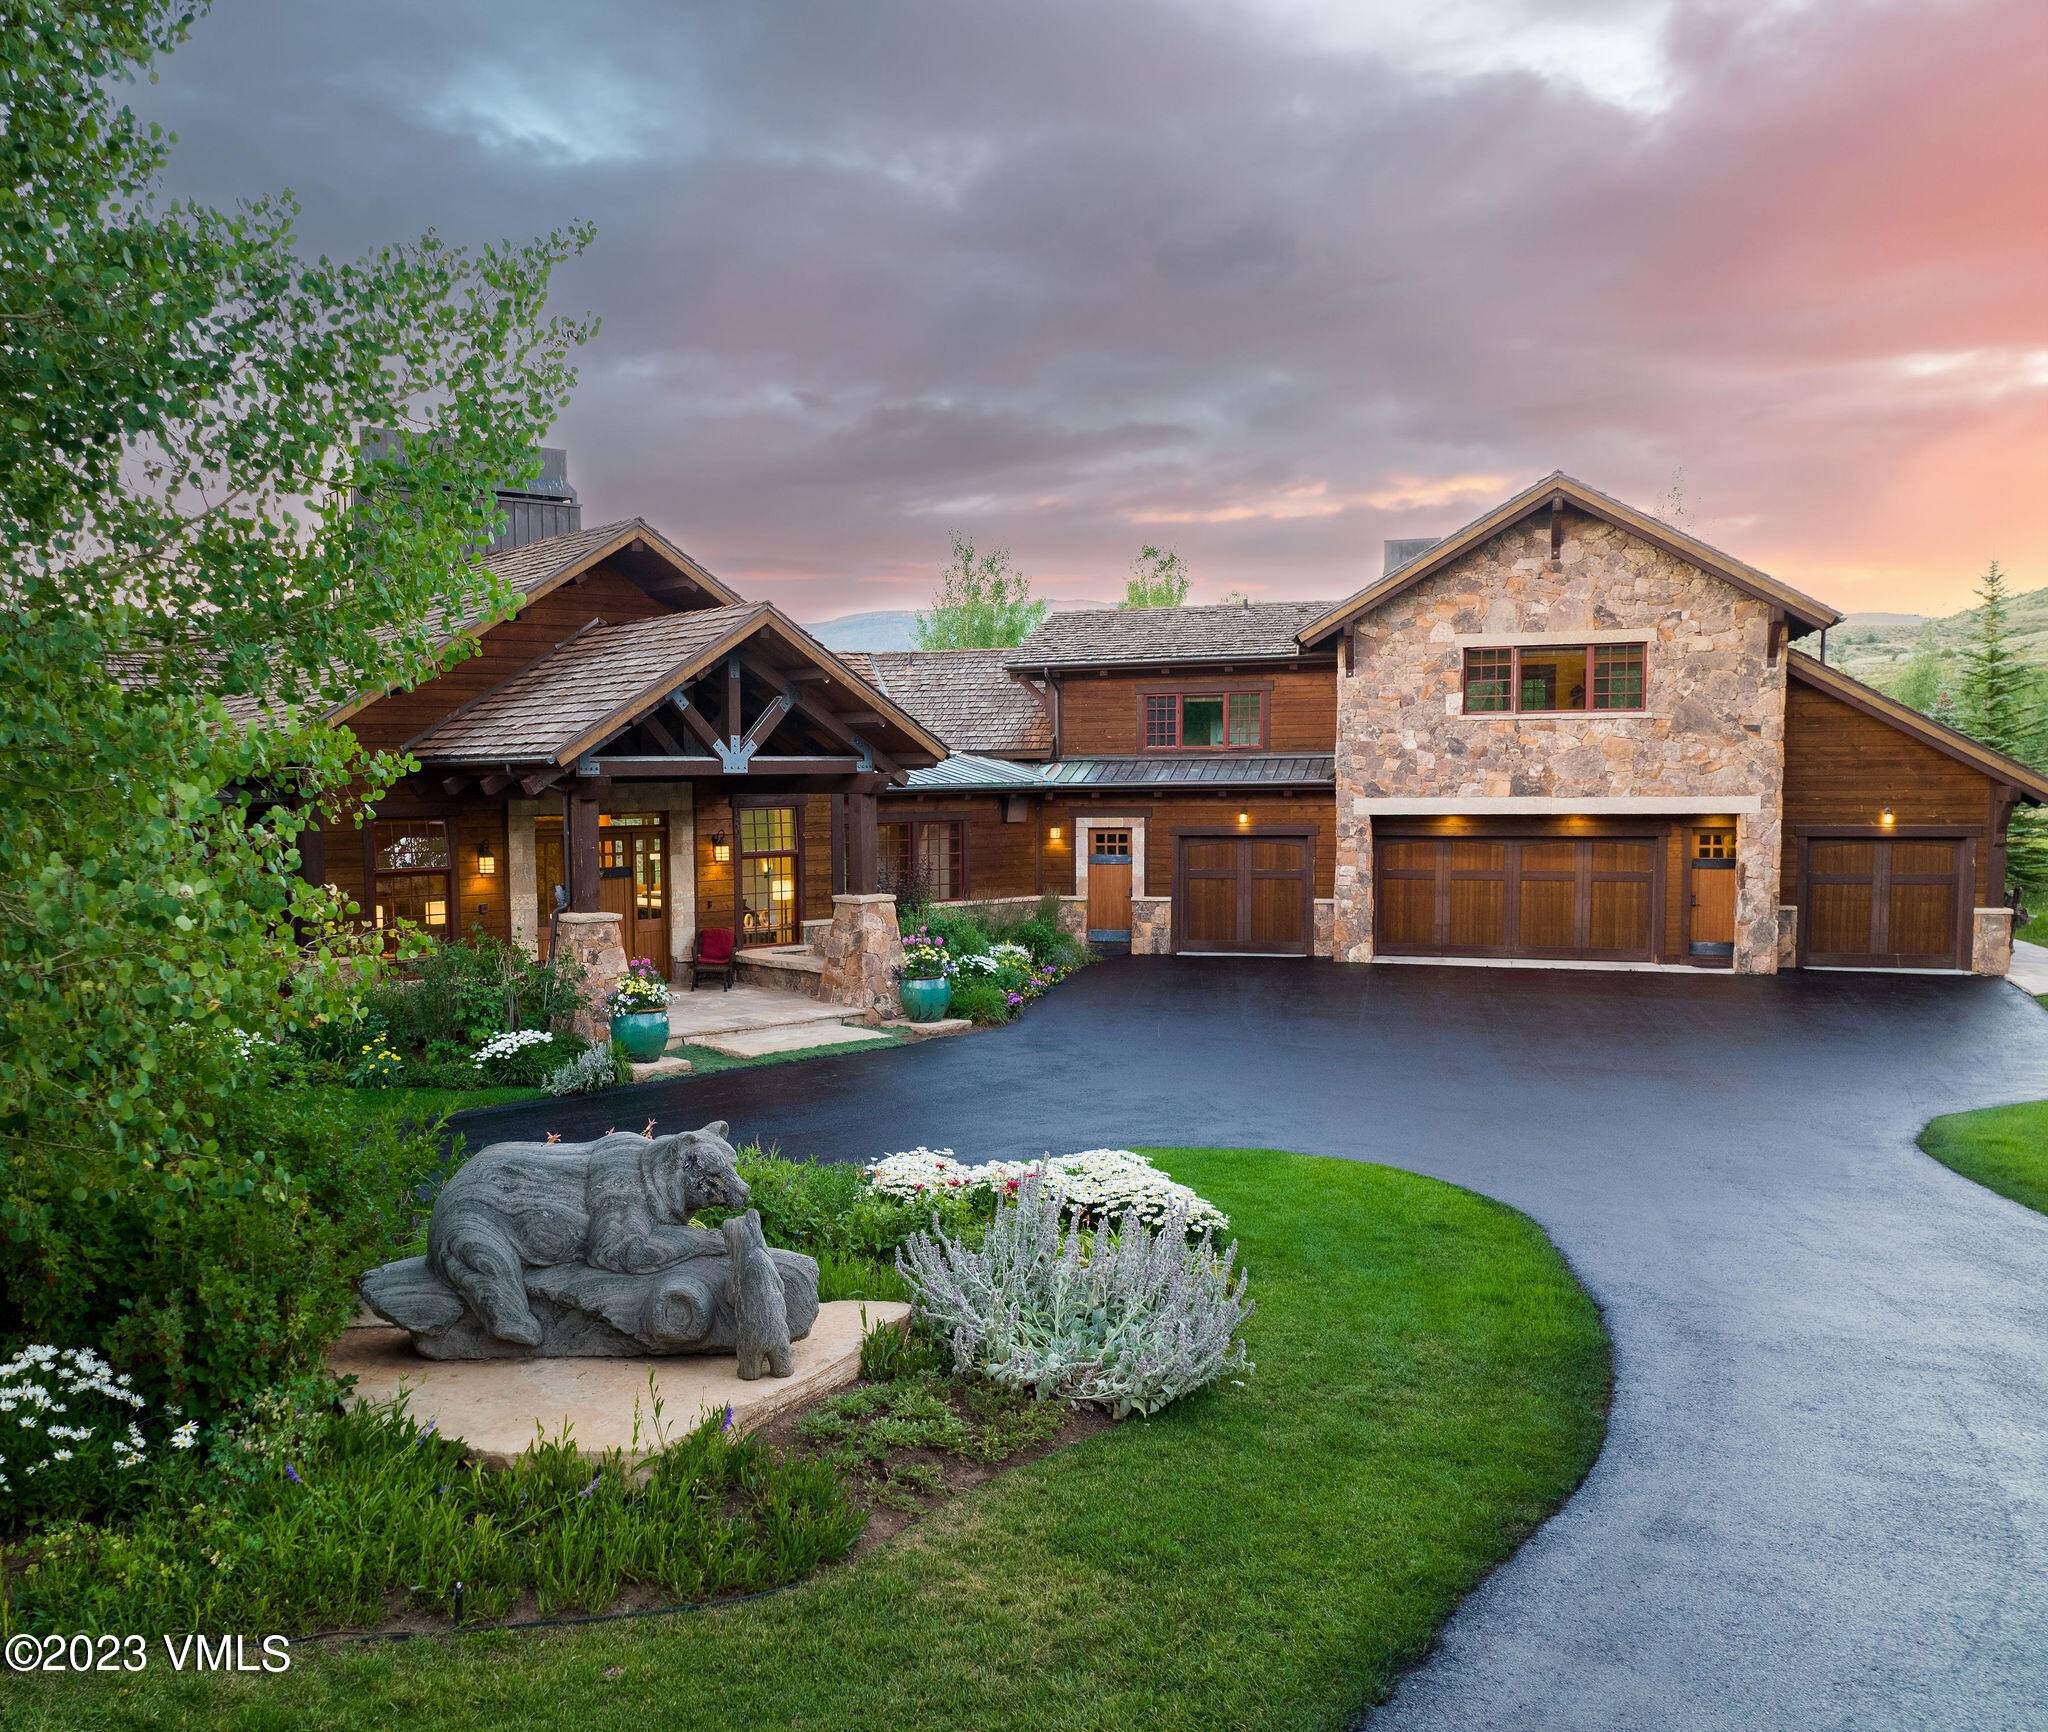 A spectacular mountain haven within Lake Creek Valley, Creamery Ranch is a sanctuary where the unadulterated spirit of the early American West remains intertwined with the present.